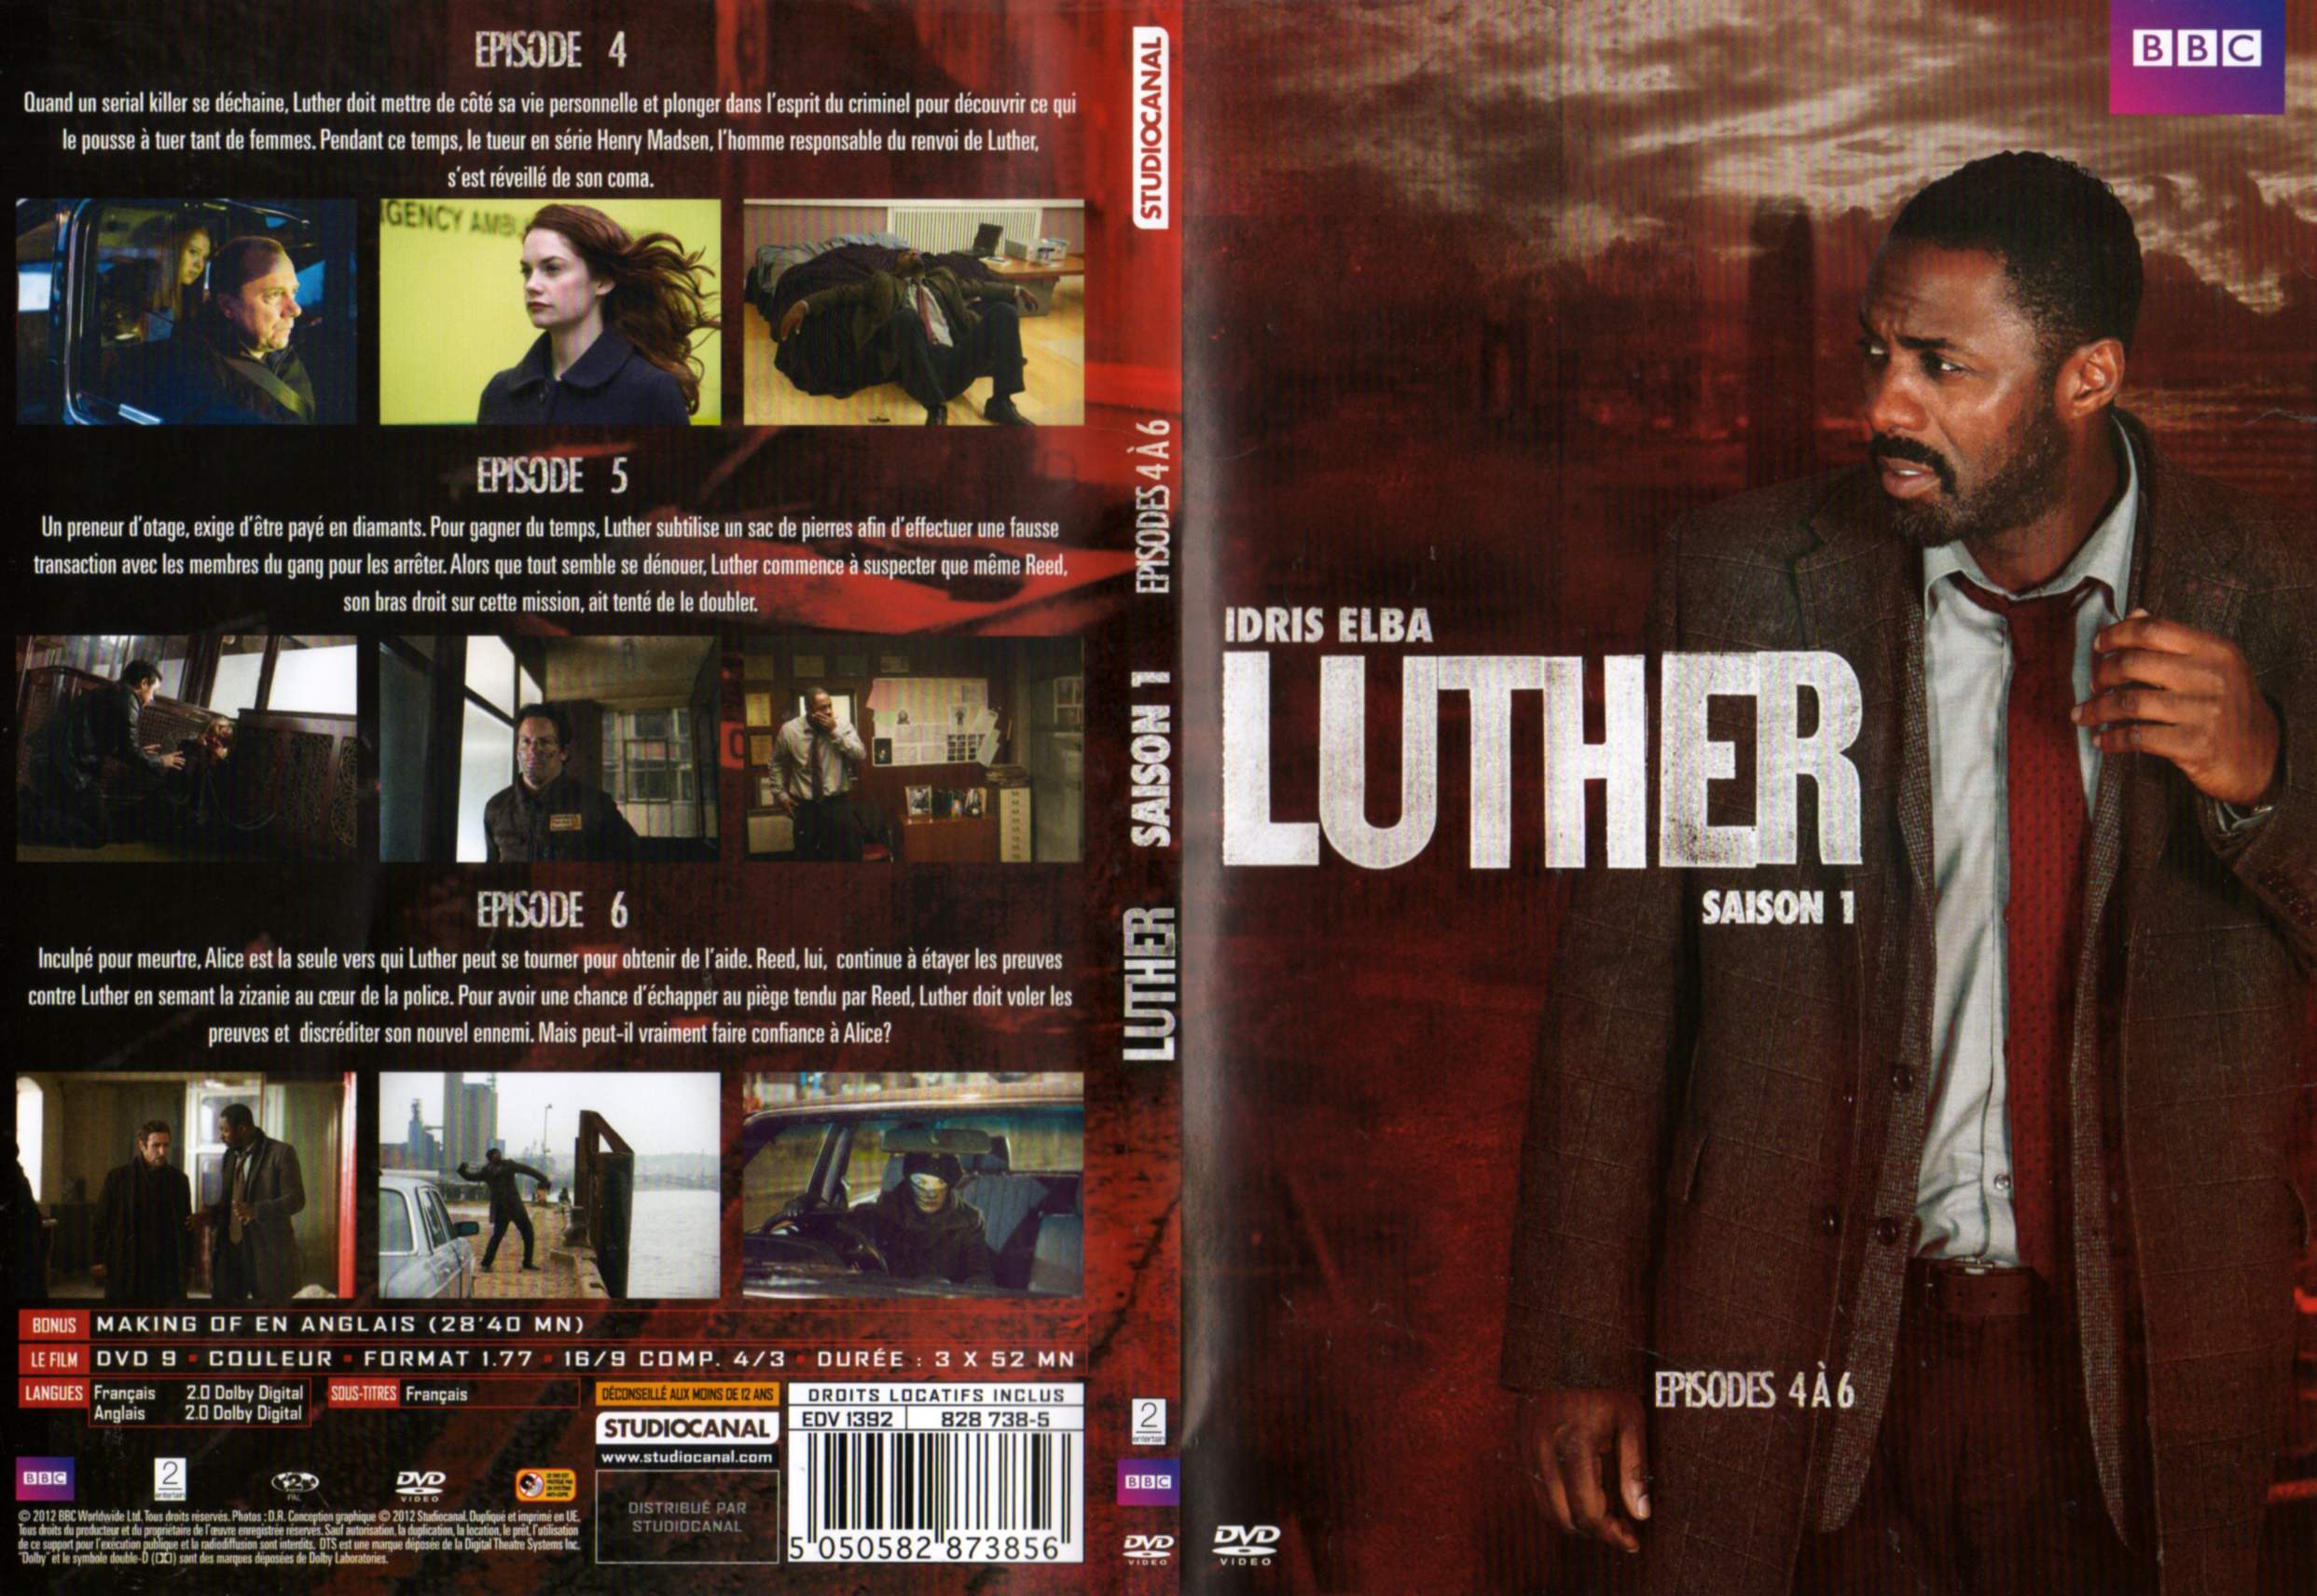 Jaquette DVD Luther Saison 1 Ep 4-5-6